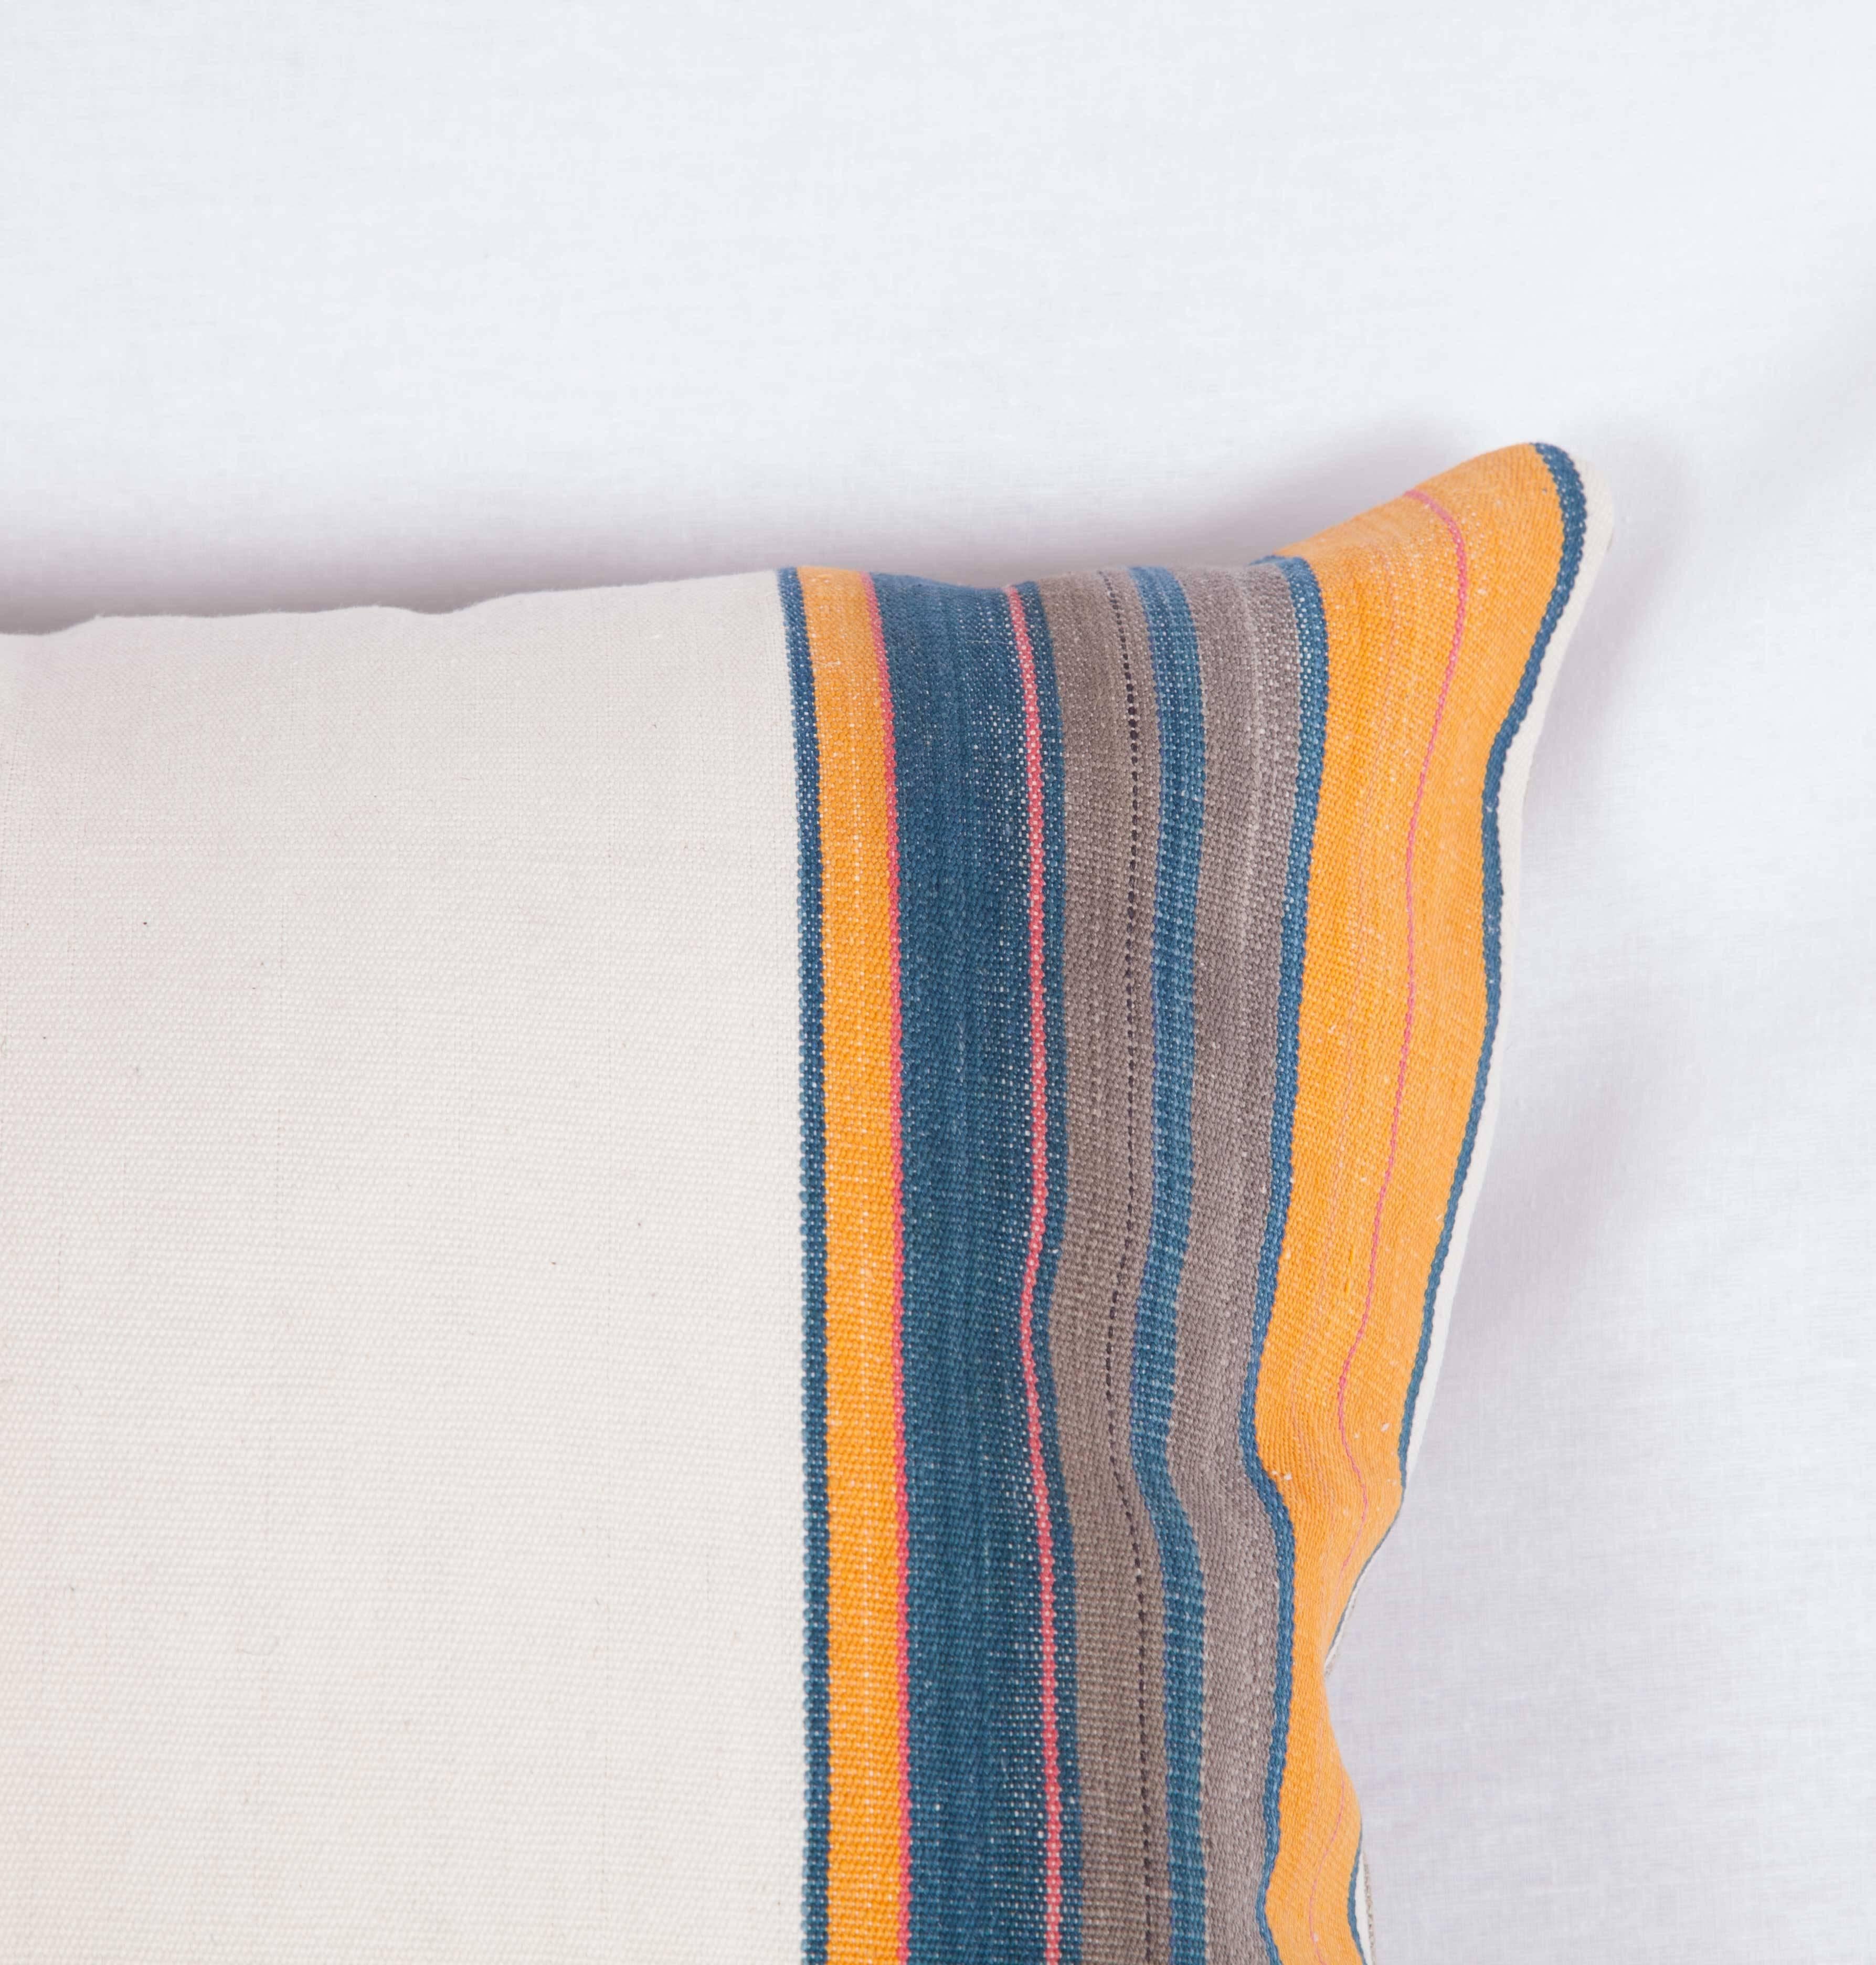 Kilim Mid-20th Century Pillow Made Out of a Cotton Flat-Weave For Sale